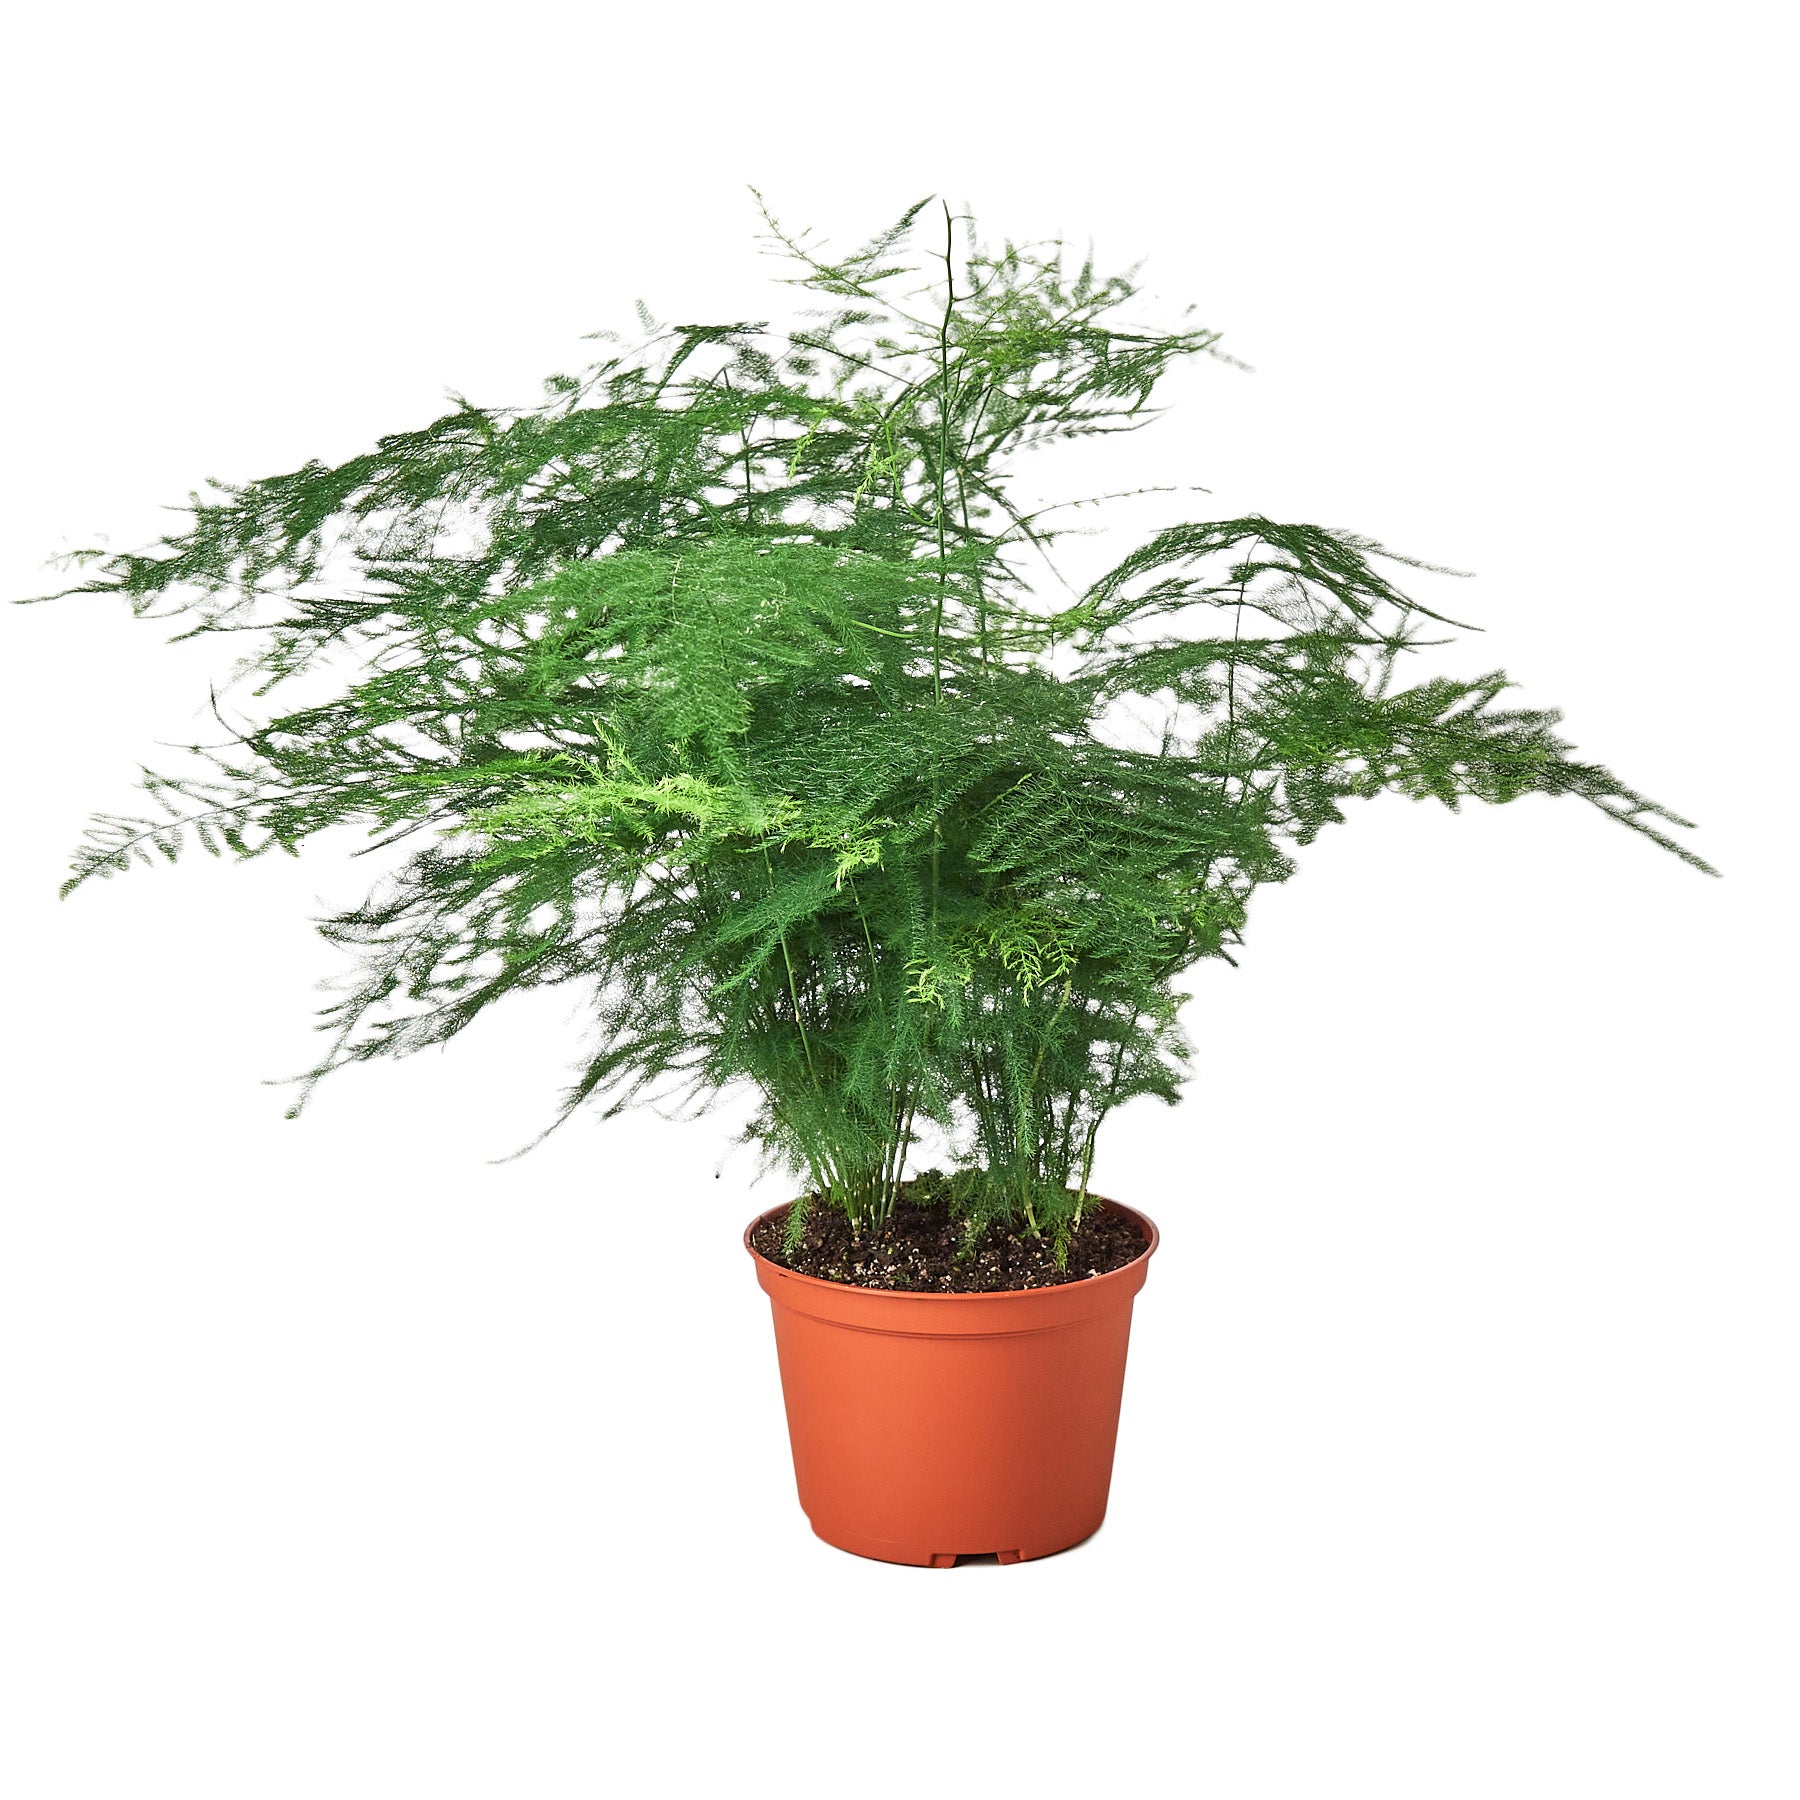 A plant in a pot on a white background, sourced from one of the top plant nurseries near me.